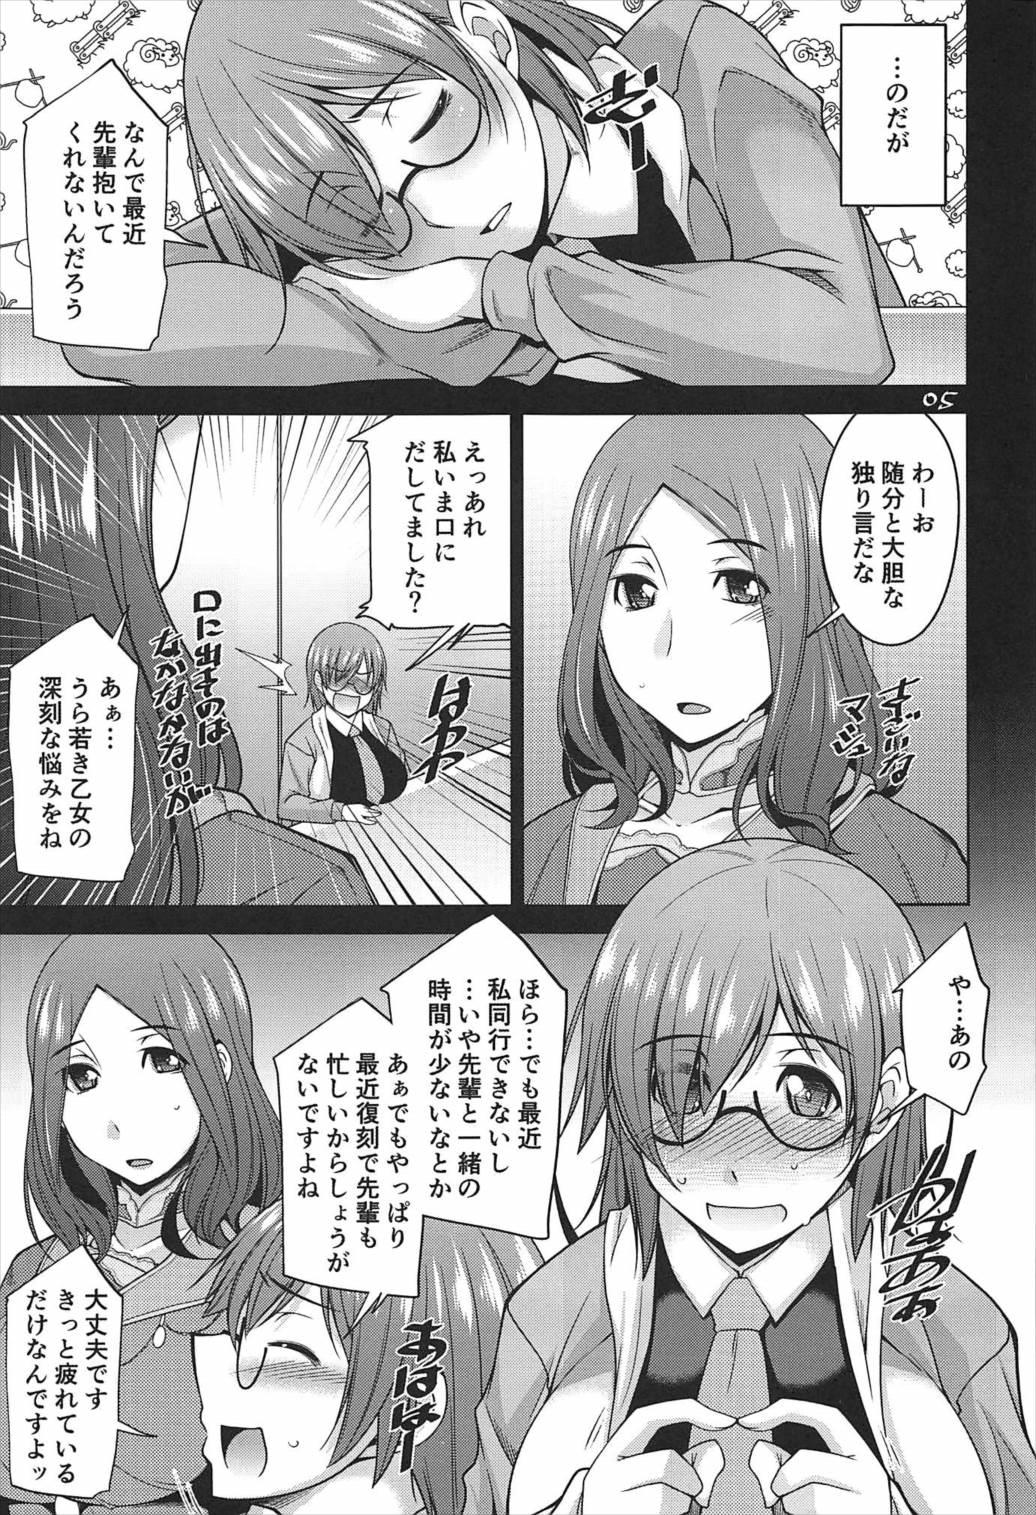 Transsexual Mash to Natsuyasumi - Fate grand order Hot Women Having Sex - Page 4